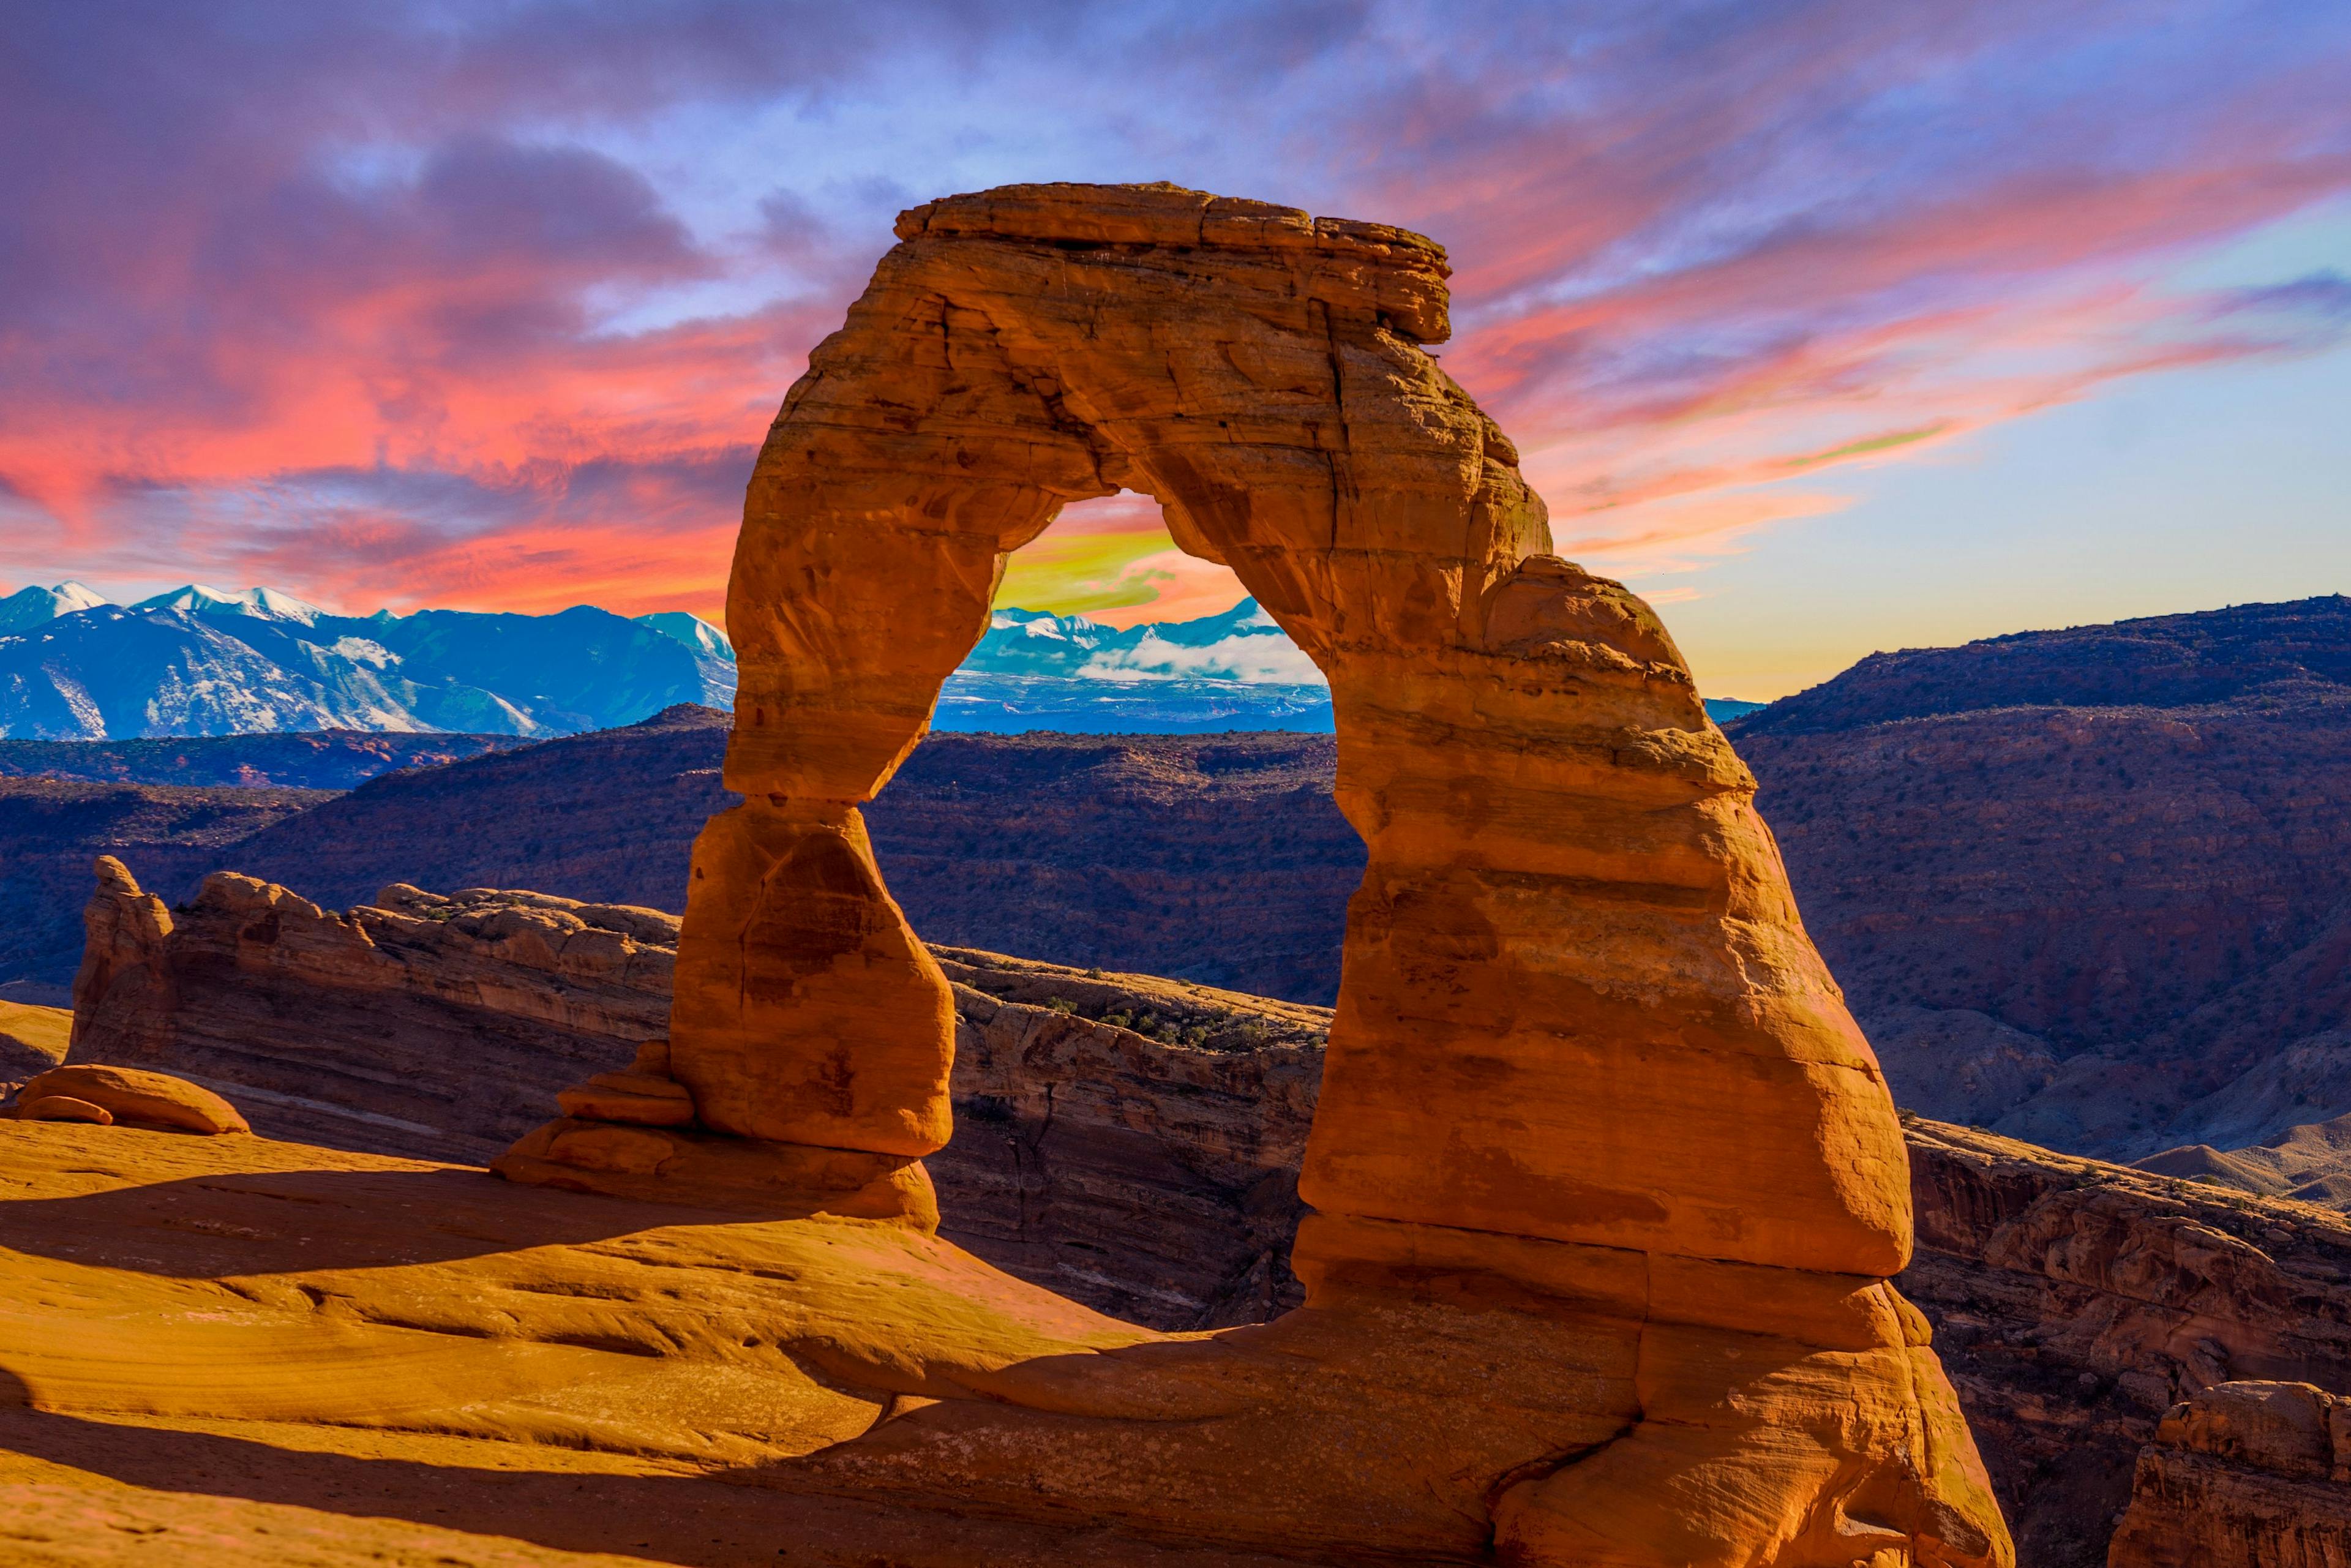 Arches National Park, right by Moab Utah, the location of this study. | Image Credit: © Josemaria Toscano - stock.adobe.com